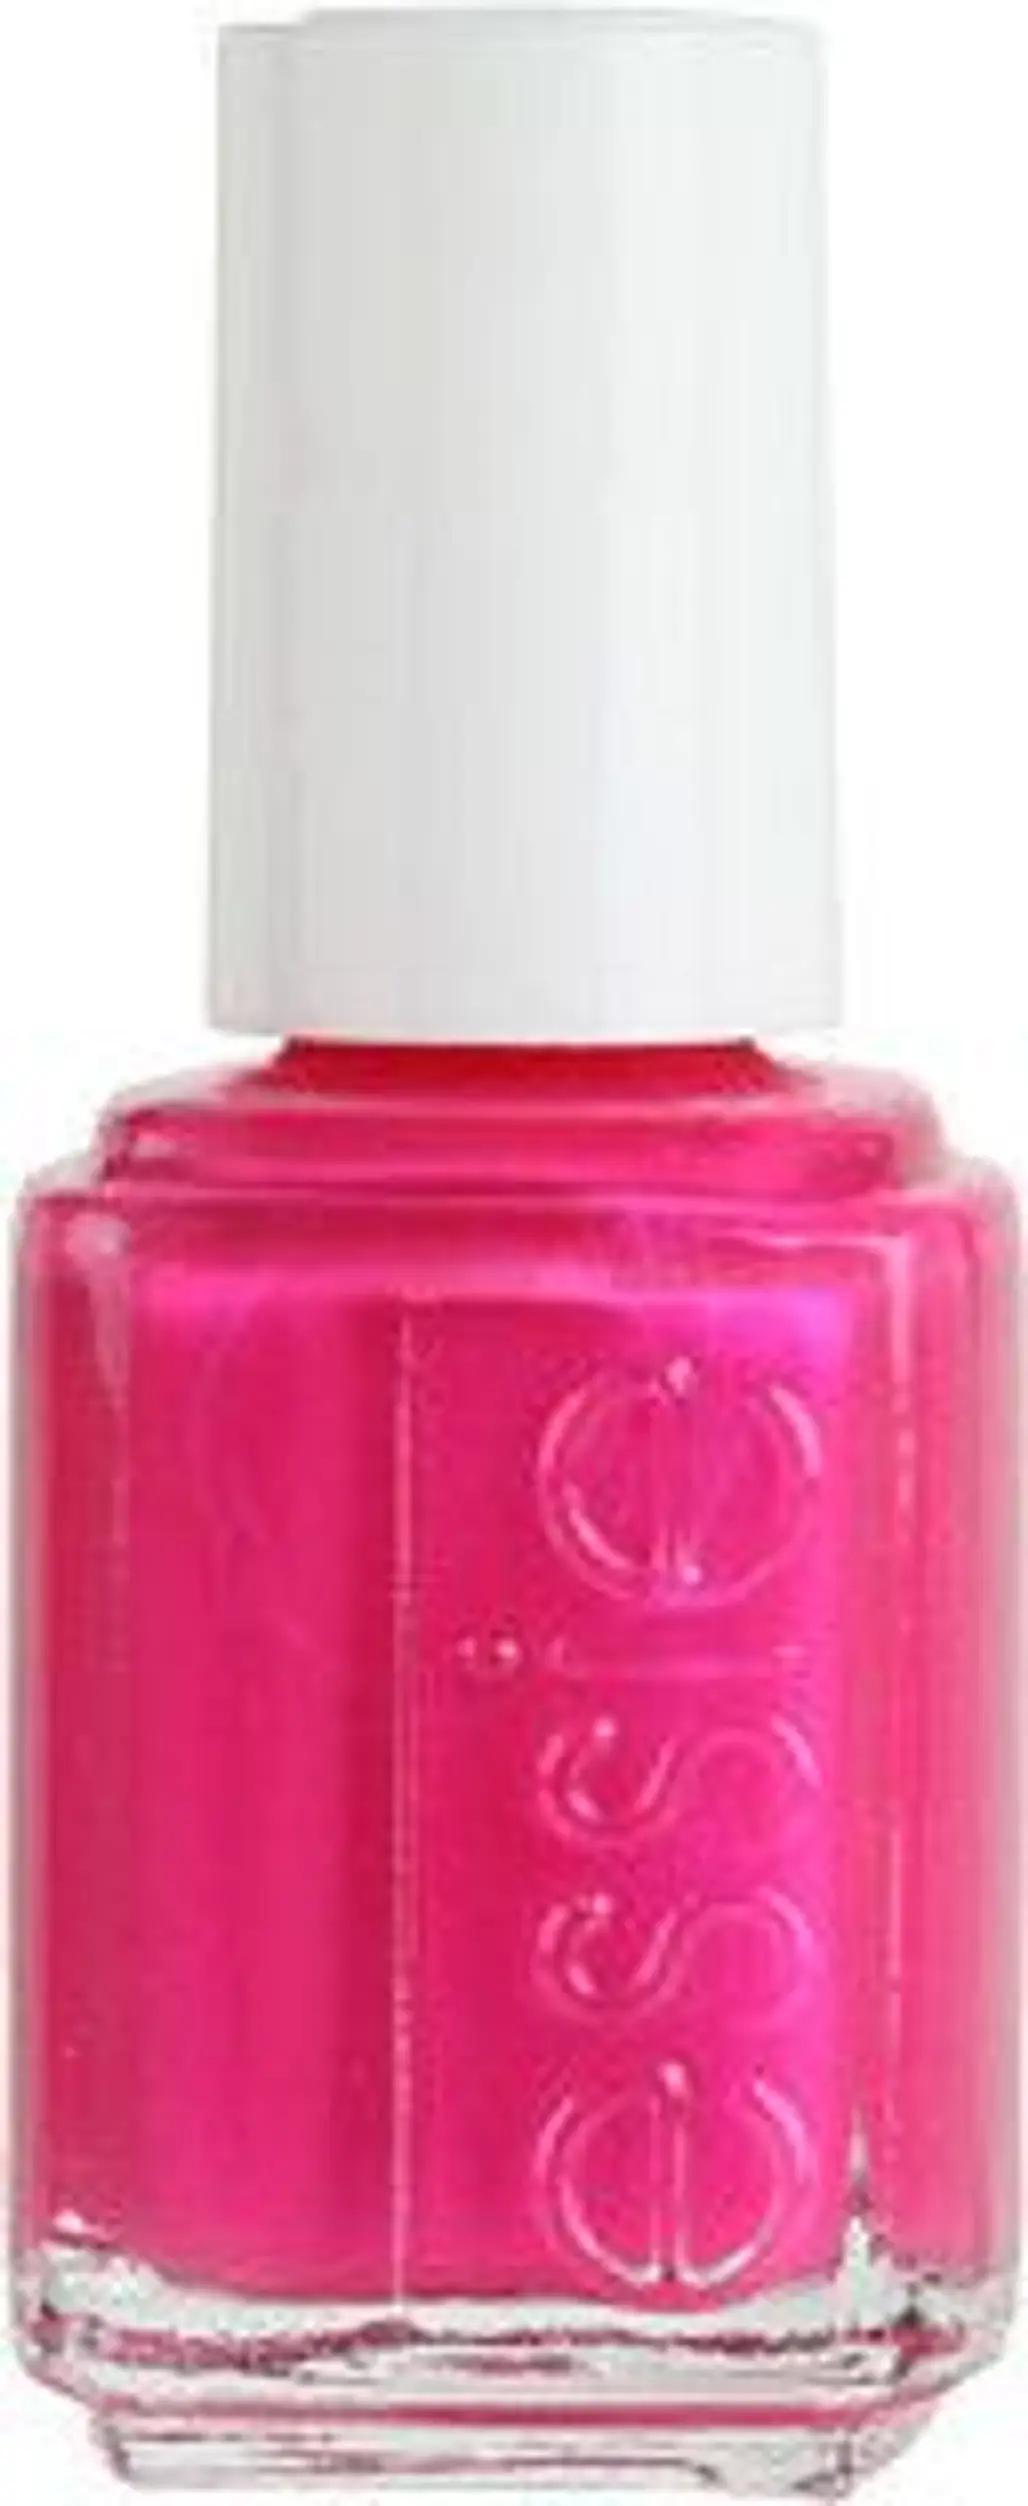 Essie Navigate Her Spring Nail Polish Collection